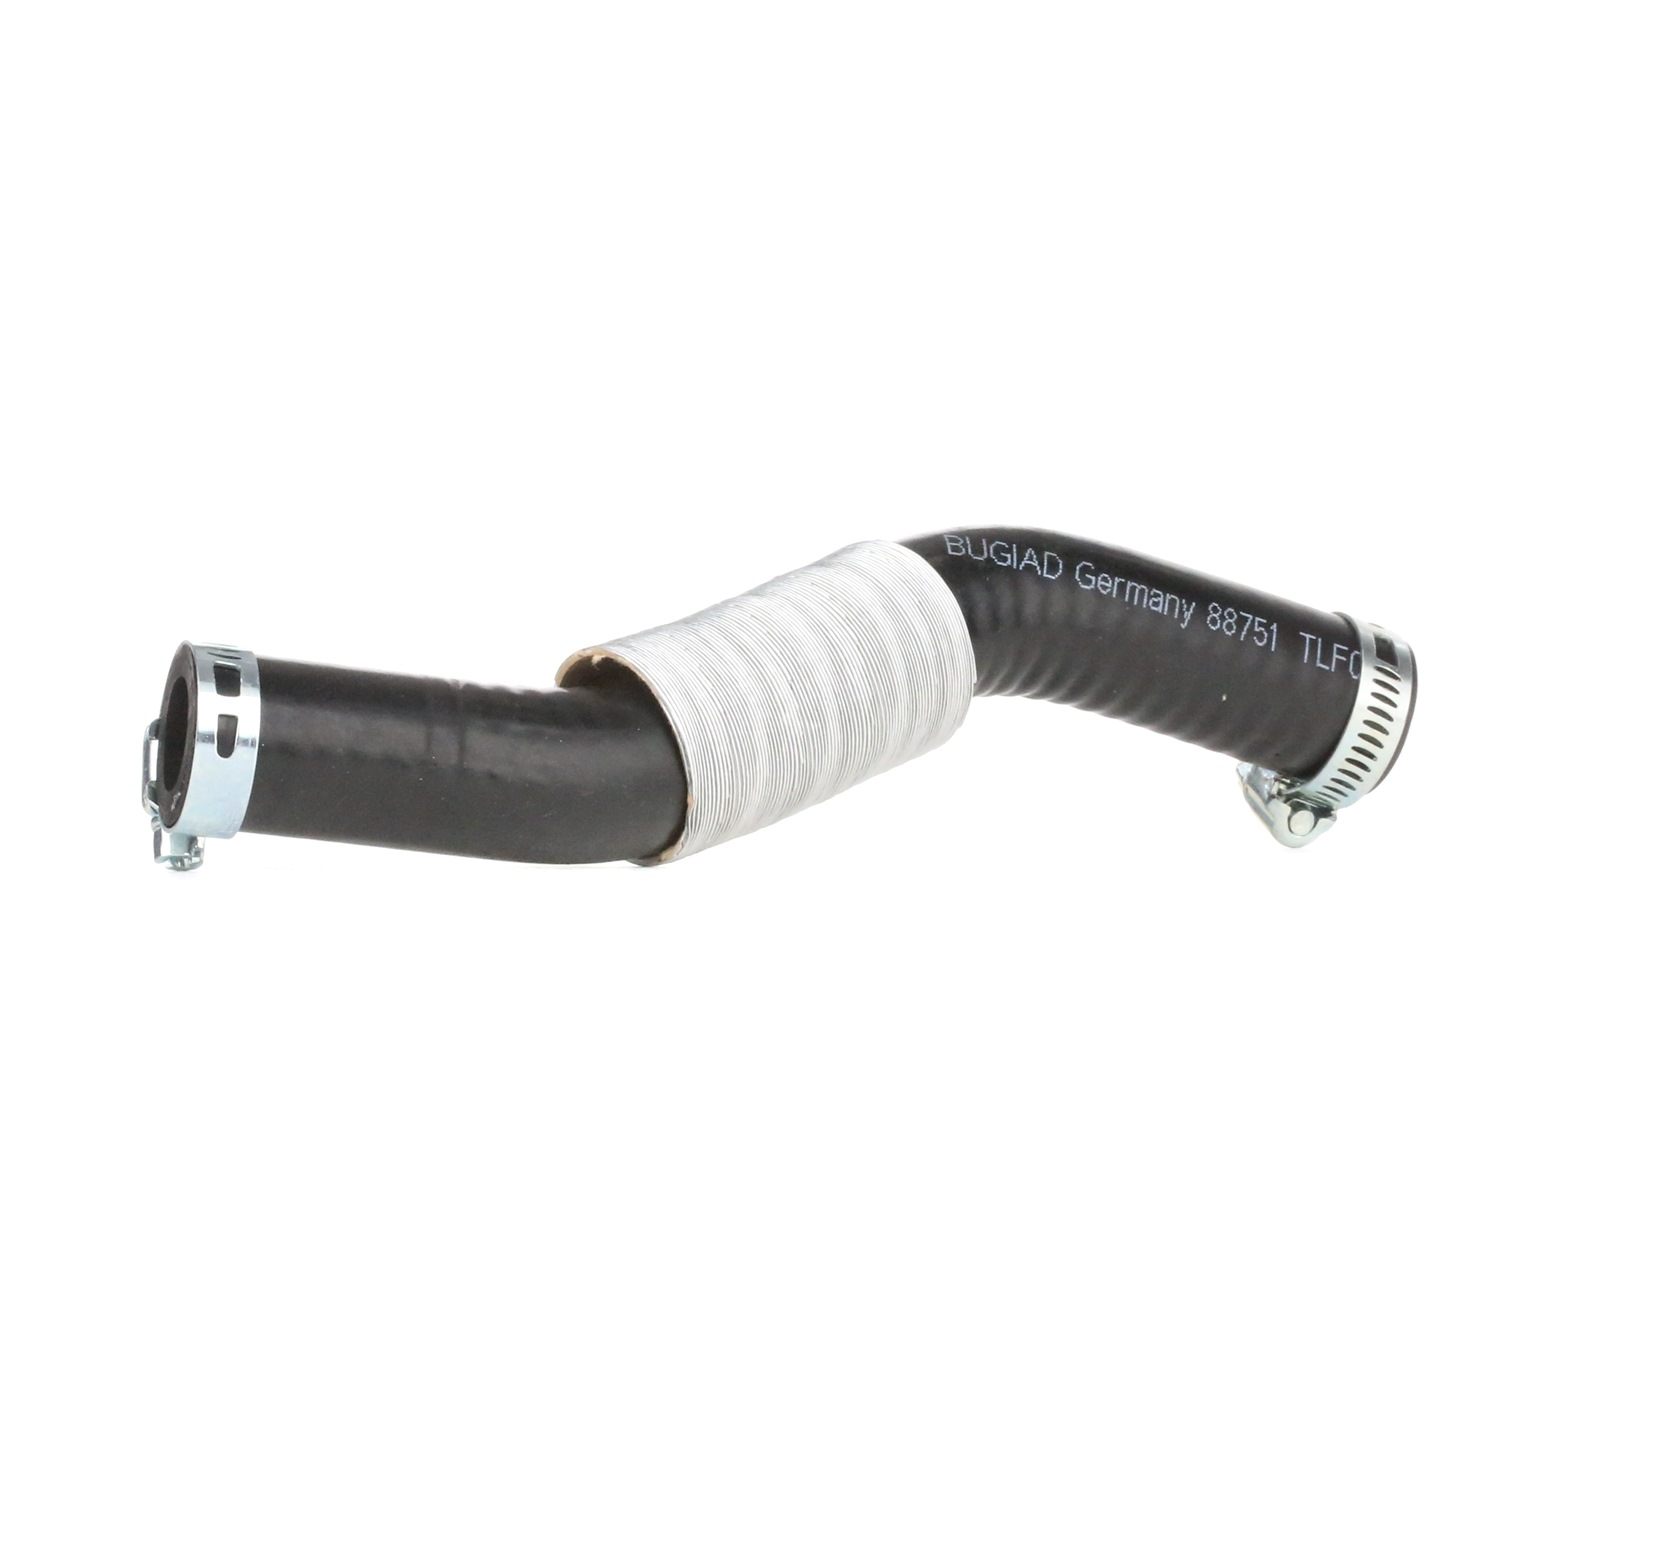 BUGIAD 88751 Charger Intake Hose MINI experience and price